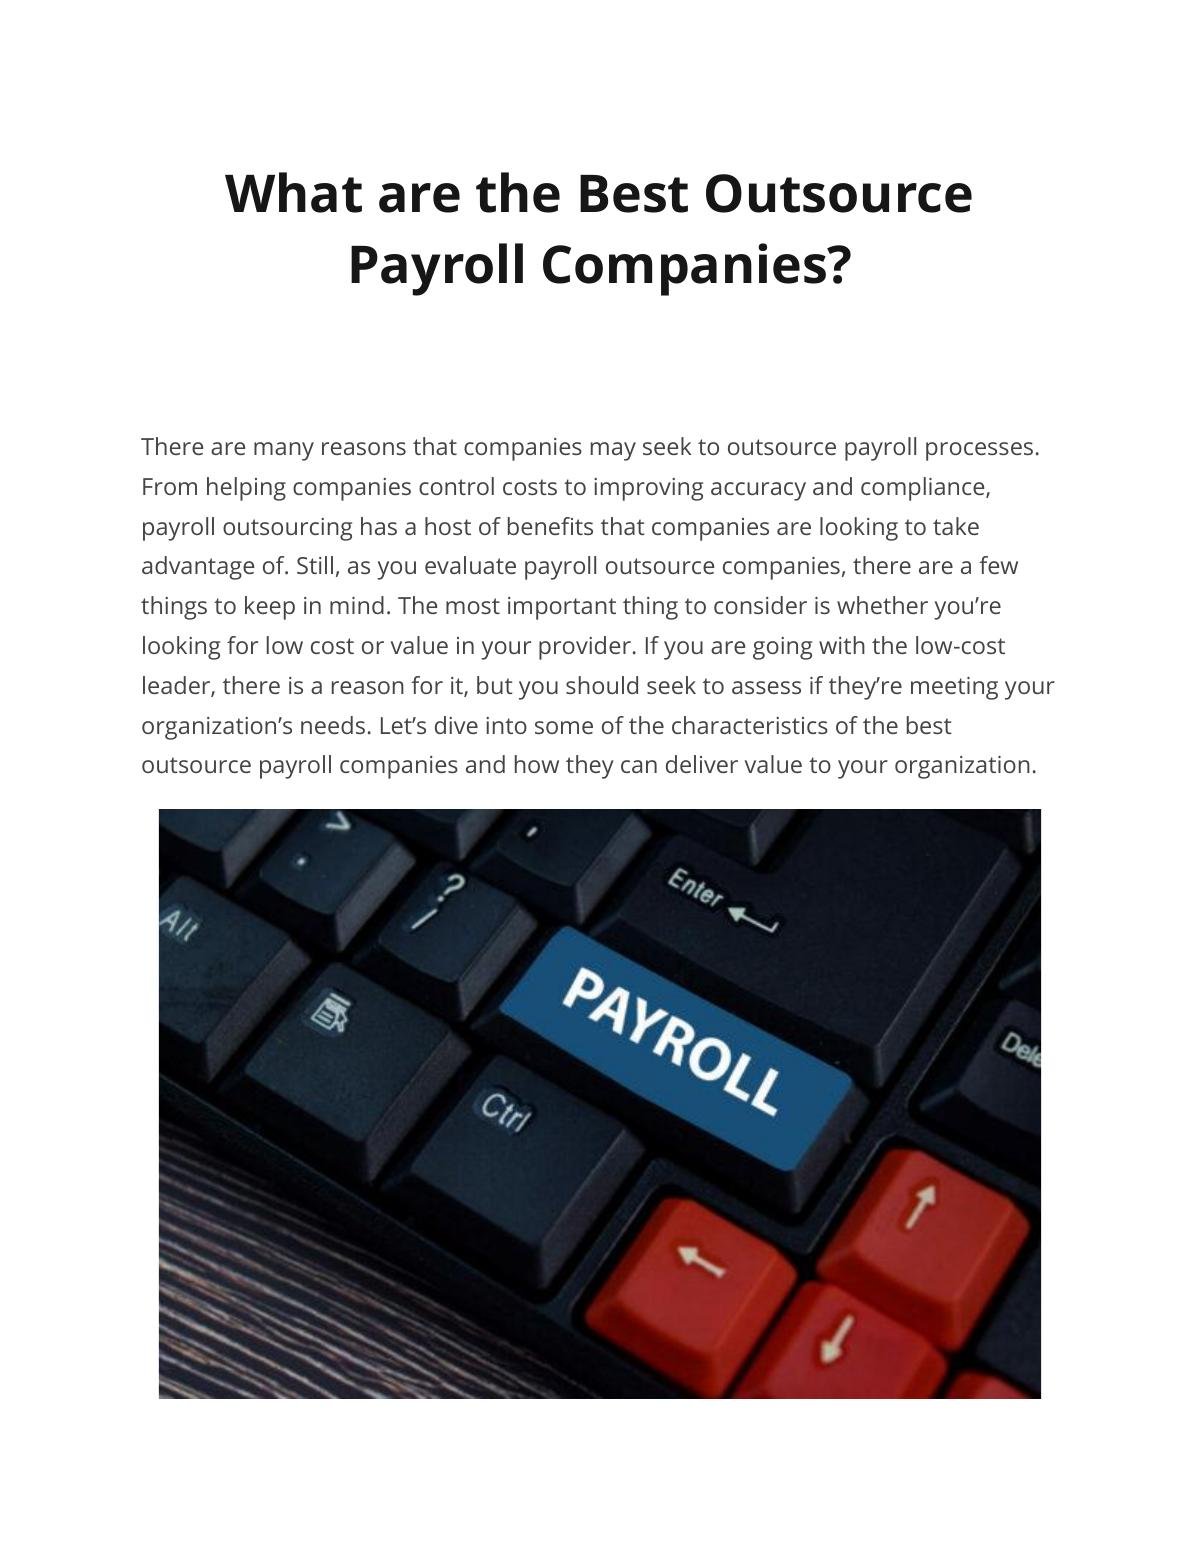 What are the Best Outsource Payroll Companies?